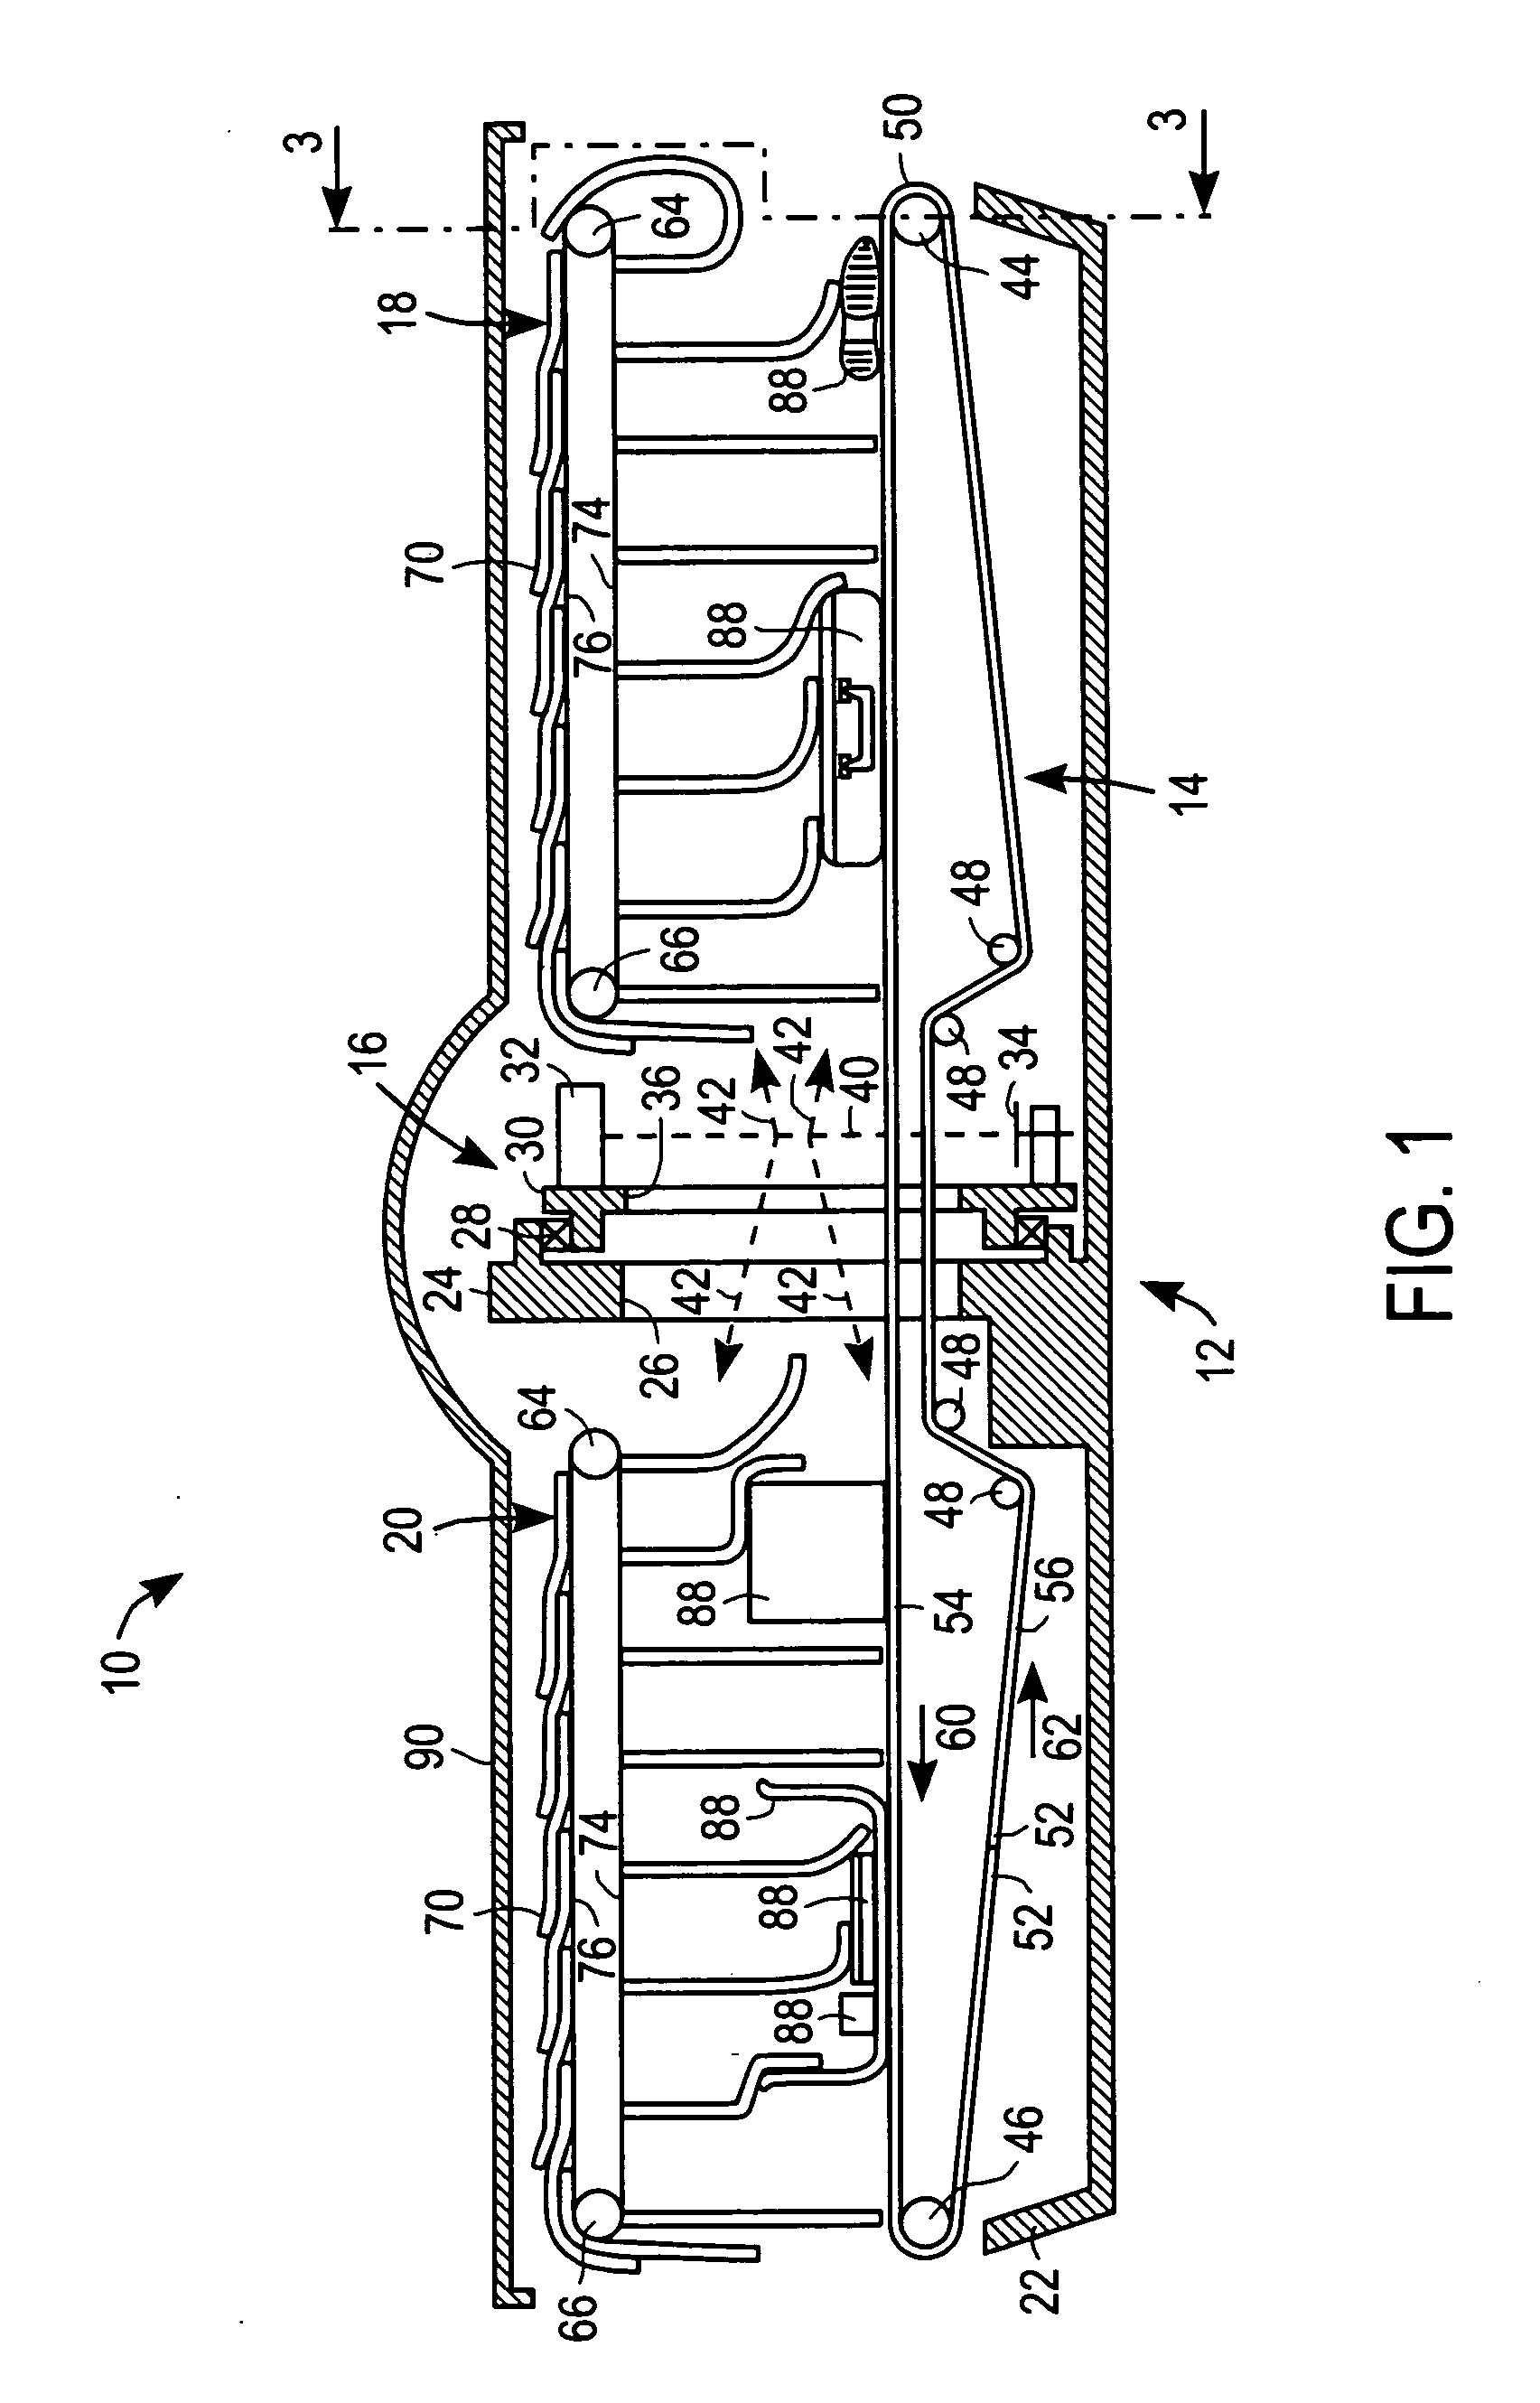 Apparatus and method for nonintrusively inspecting an object